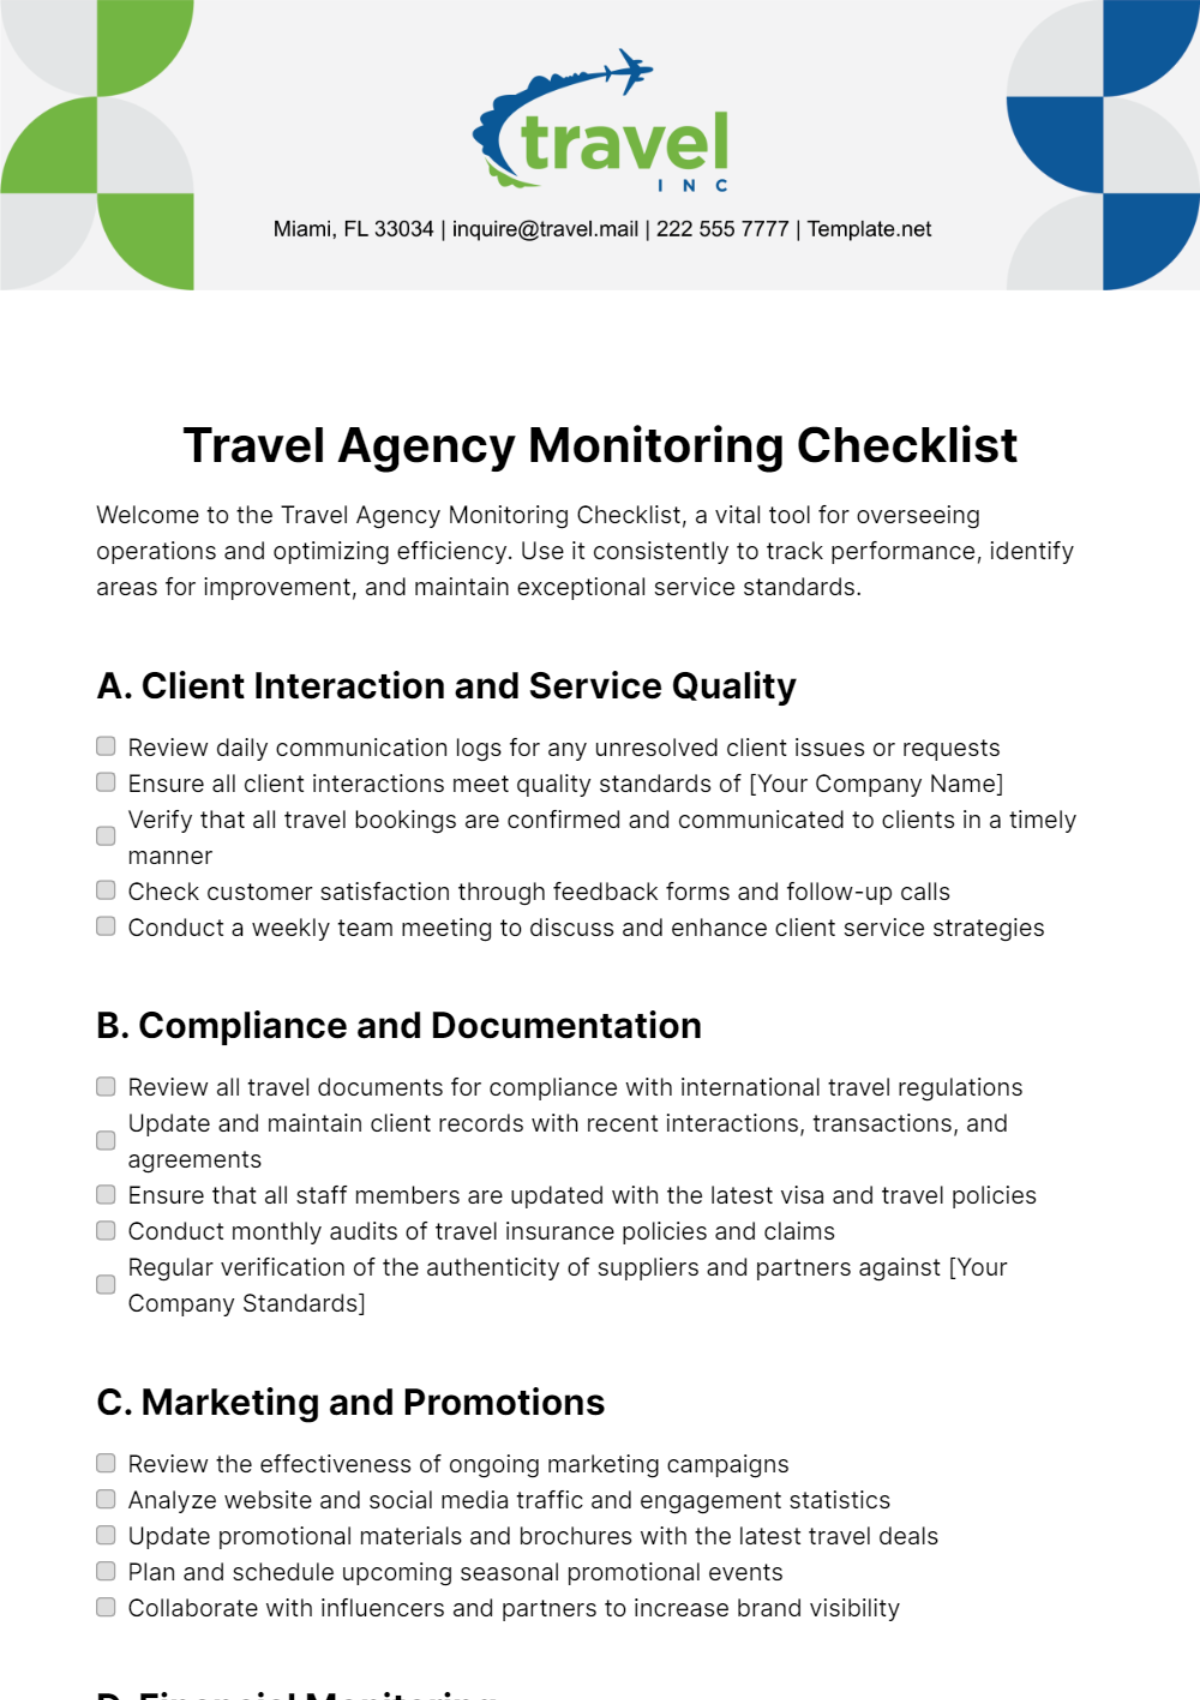 Travel Agency Monitoring Checklist Template